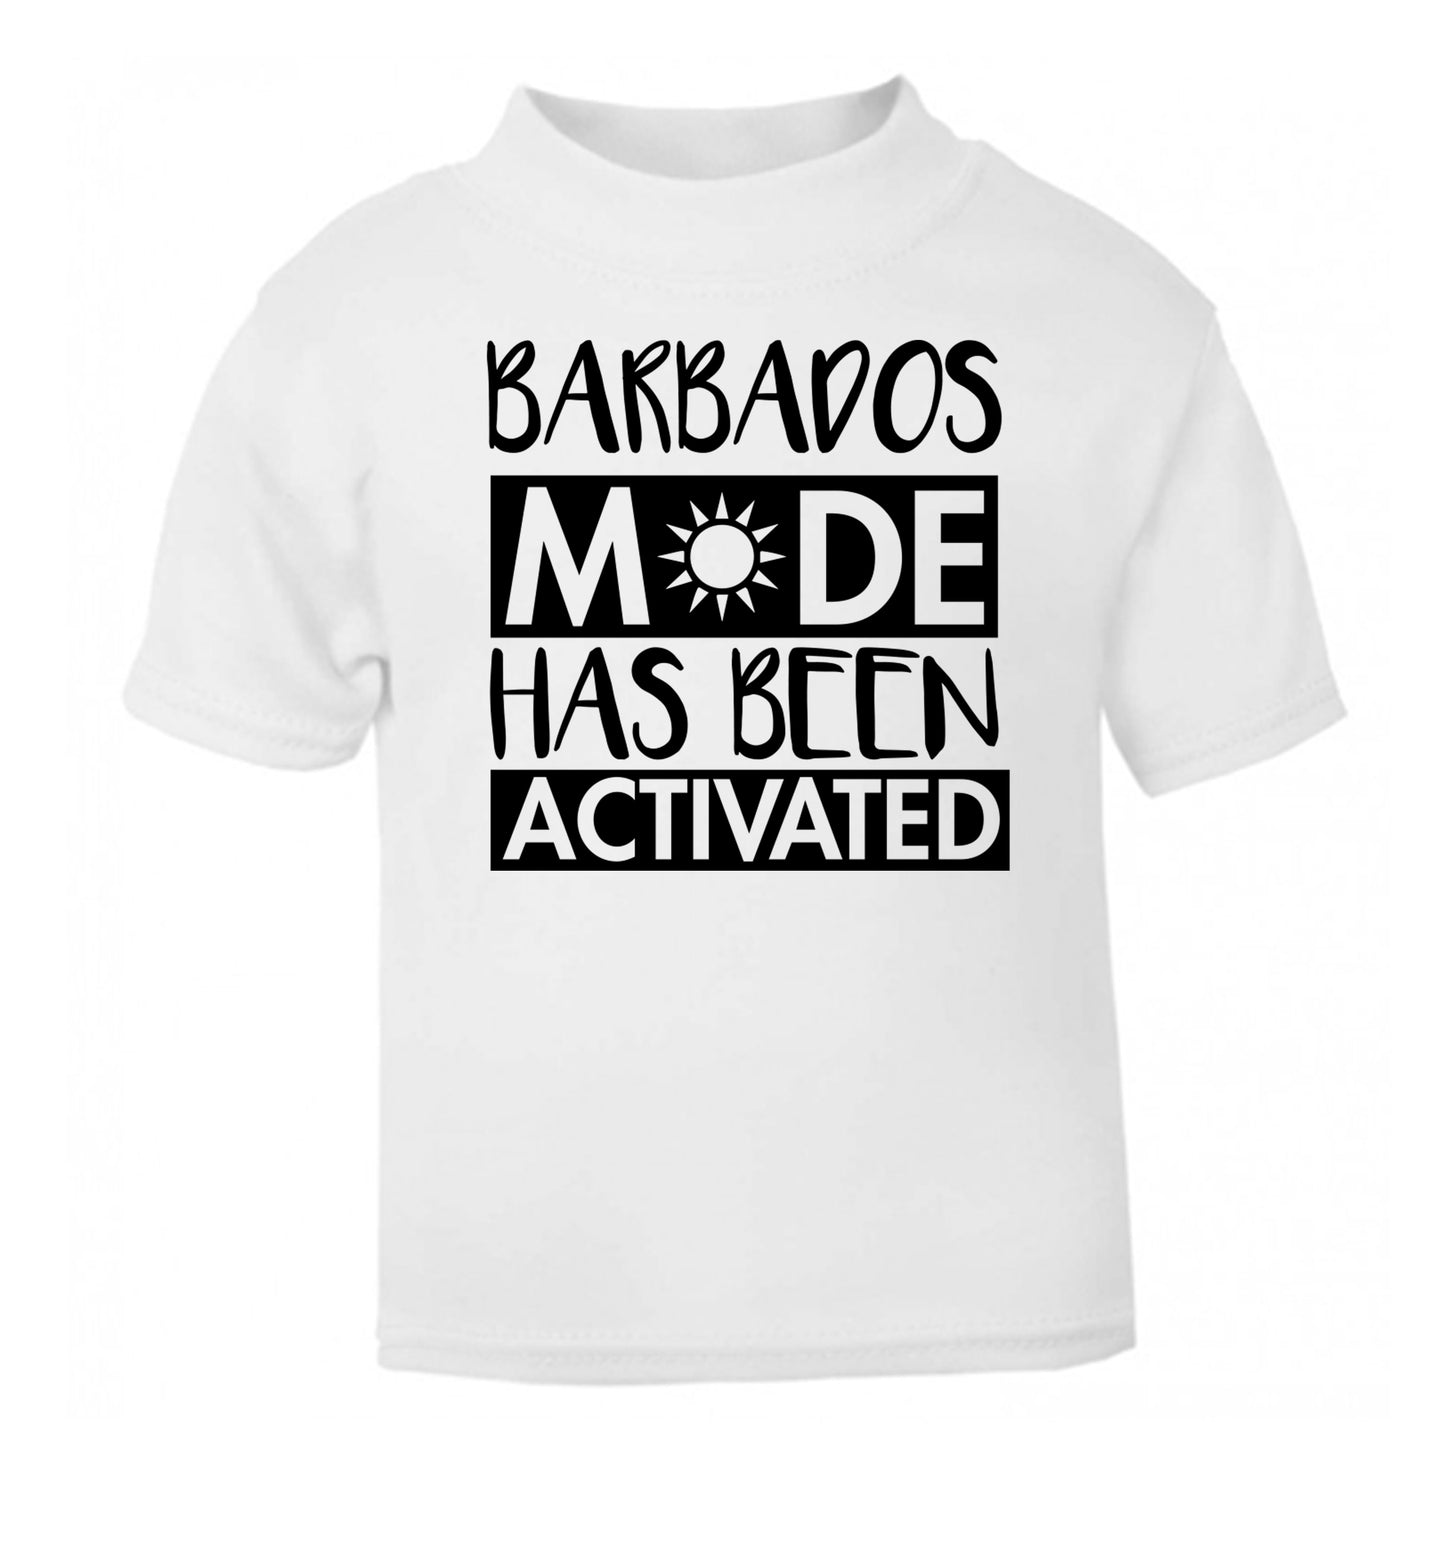 Barbados mode has been activated white Baby Toddler Tshirt 2 Years